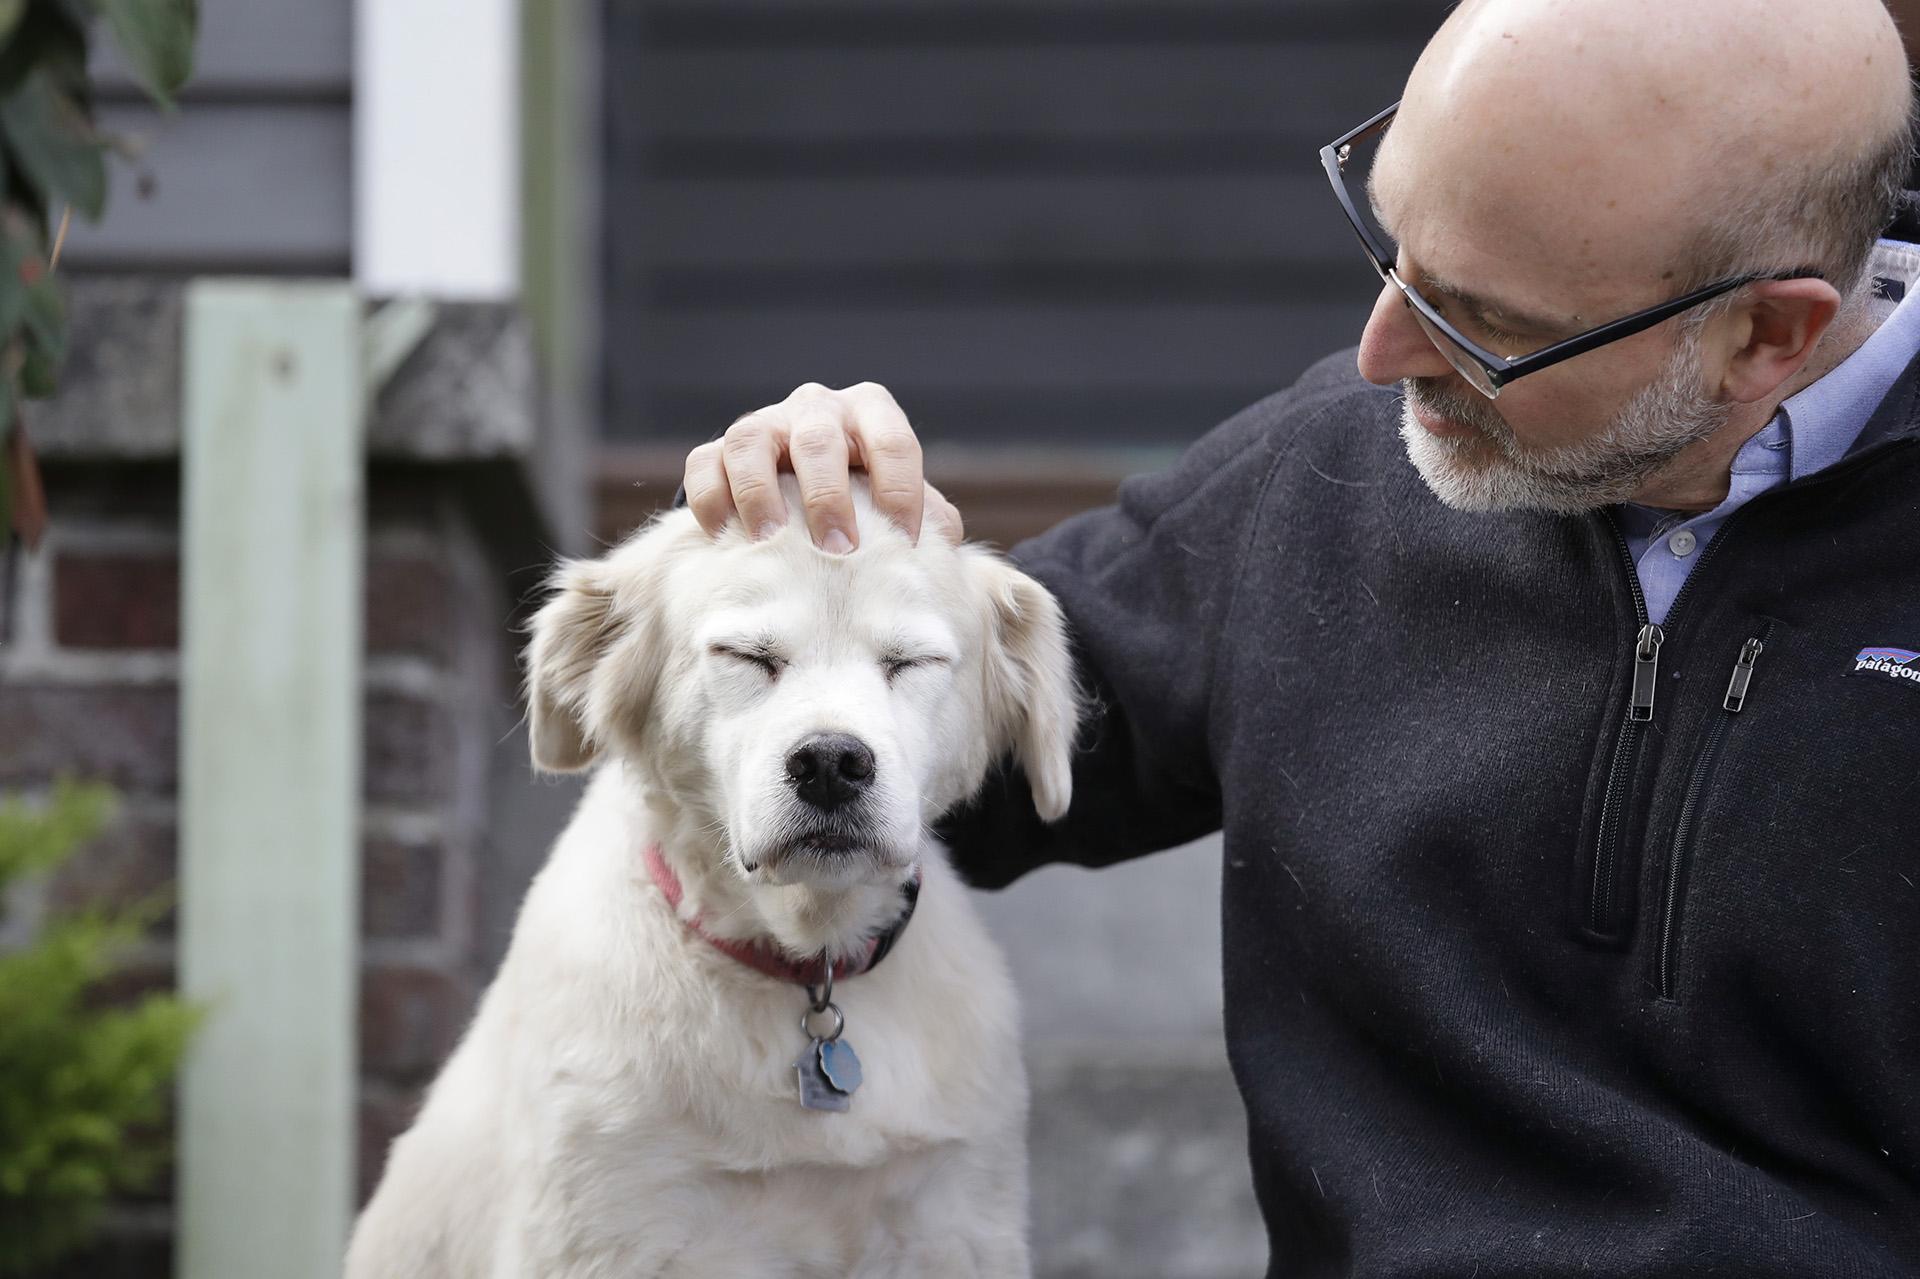 In this Monday, Nov. 11, 2019 photo, University of Washington School of Medicine researcher Daniel Promislow, the principal investigator of the Dog Aging Project grant, rubs the head of his elderly dog Frisbee at their home in Seattle. (AP Photo / Elaine Thompson)